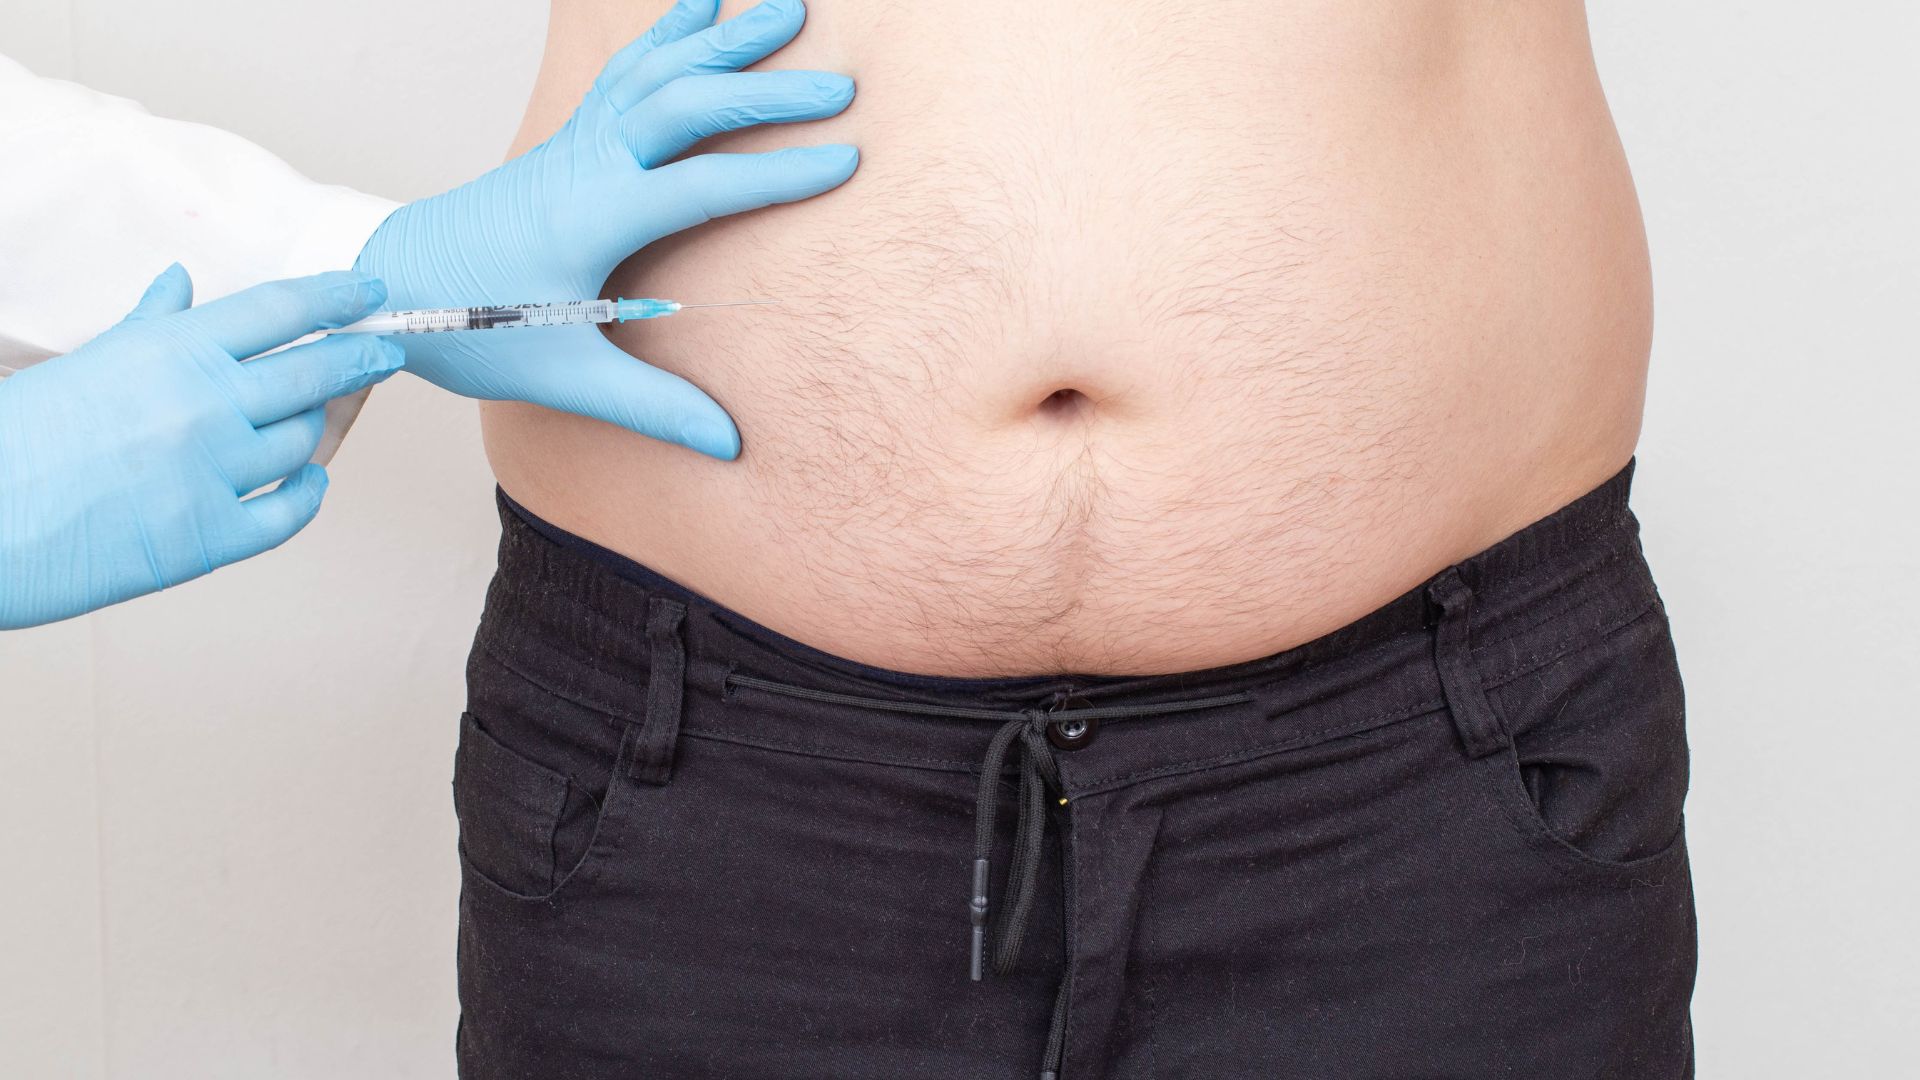 Fat Dissolving Injections in Dubai - Doctor Injecting Lipolytic Injections to Man's Body